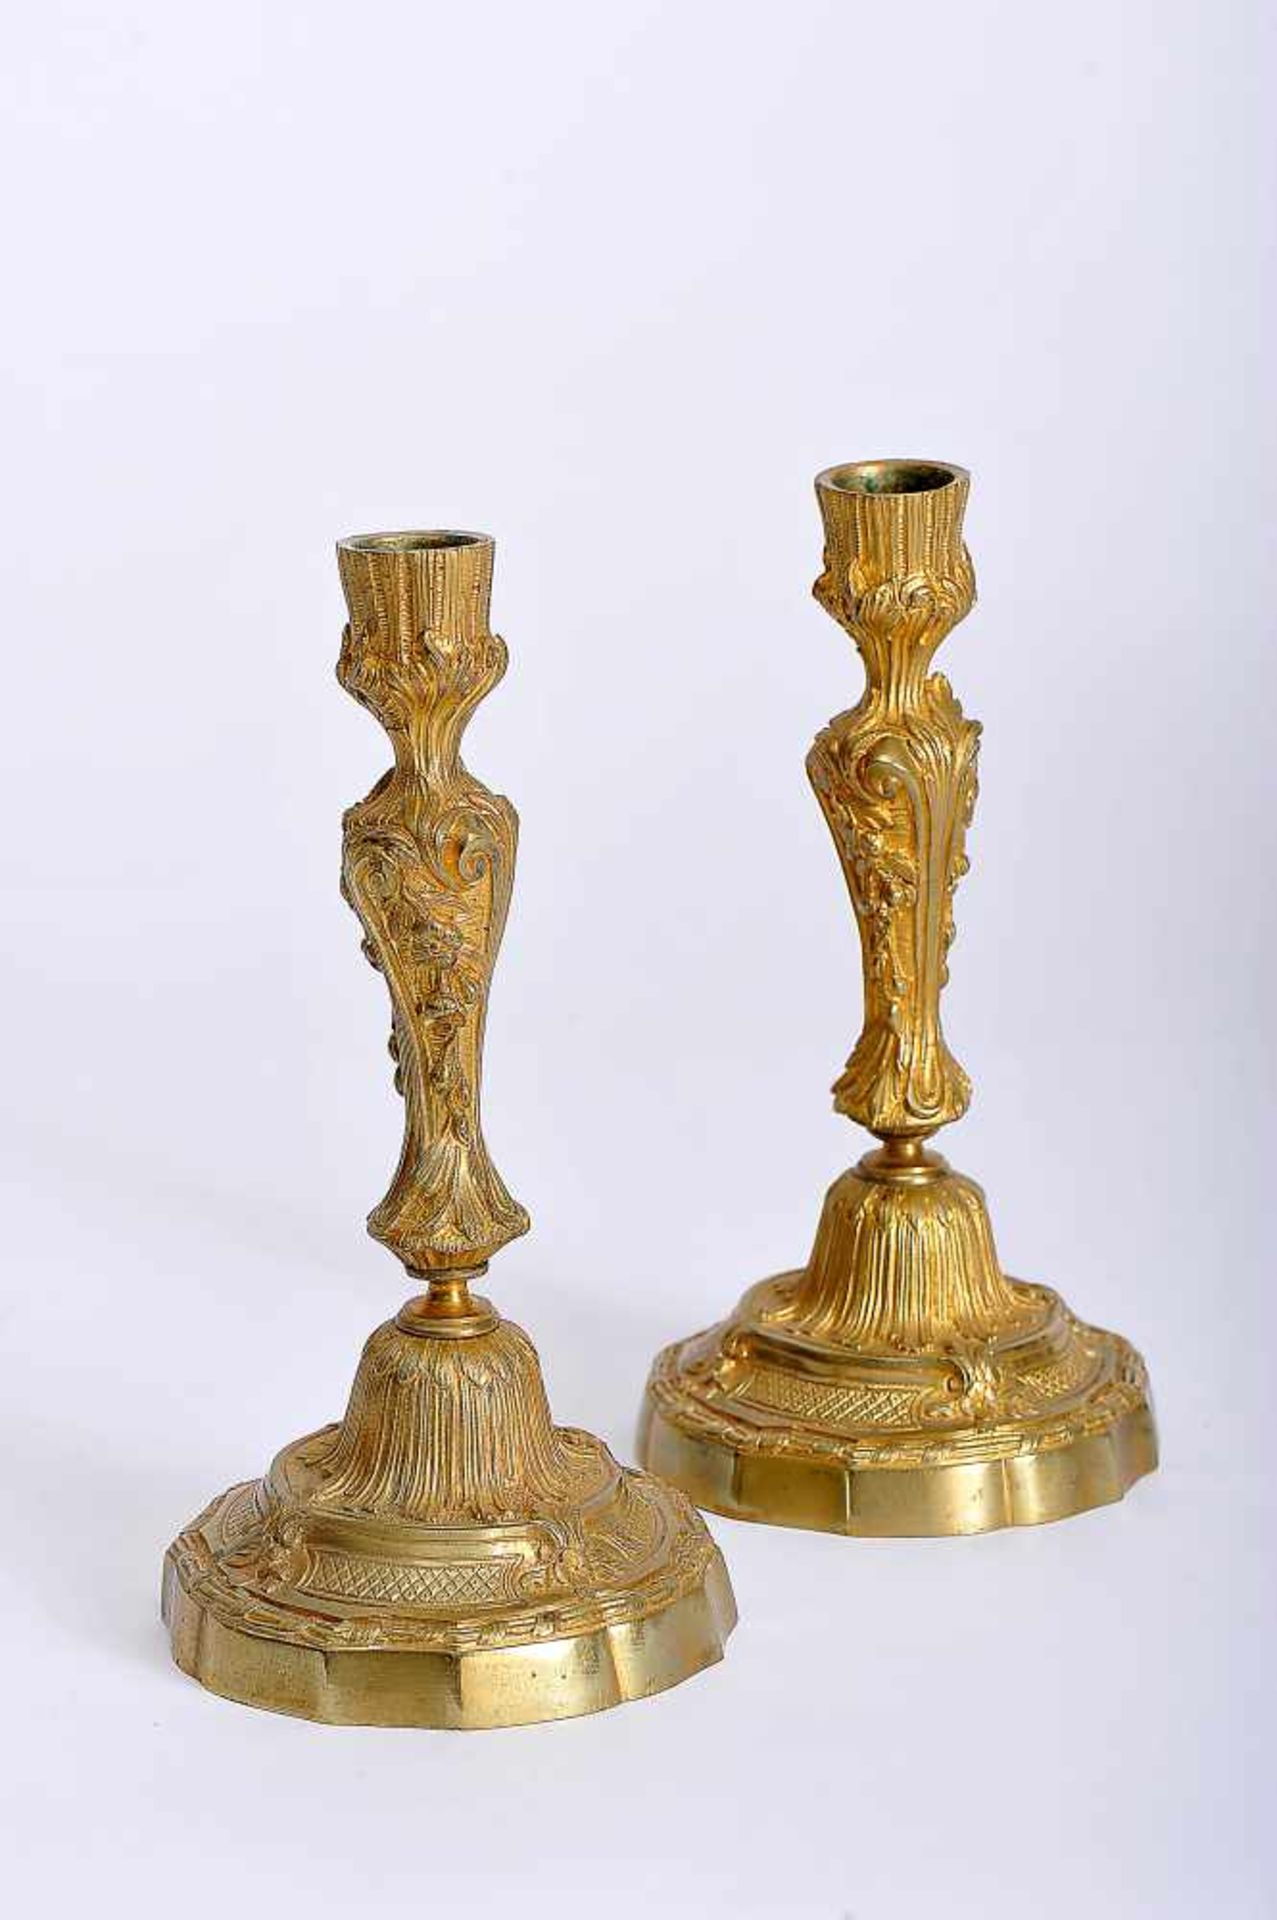 A Pair of Candlesticks, Louis XV style, gilt bronze en relief, French, 19th C., missing candle-